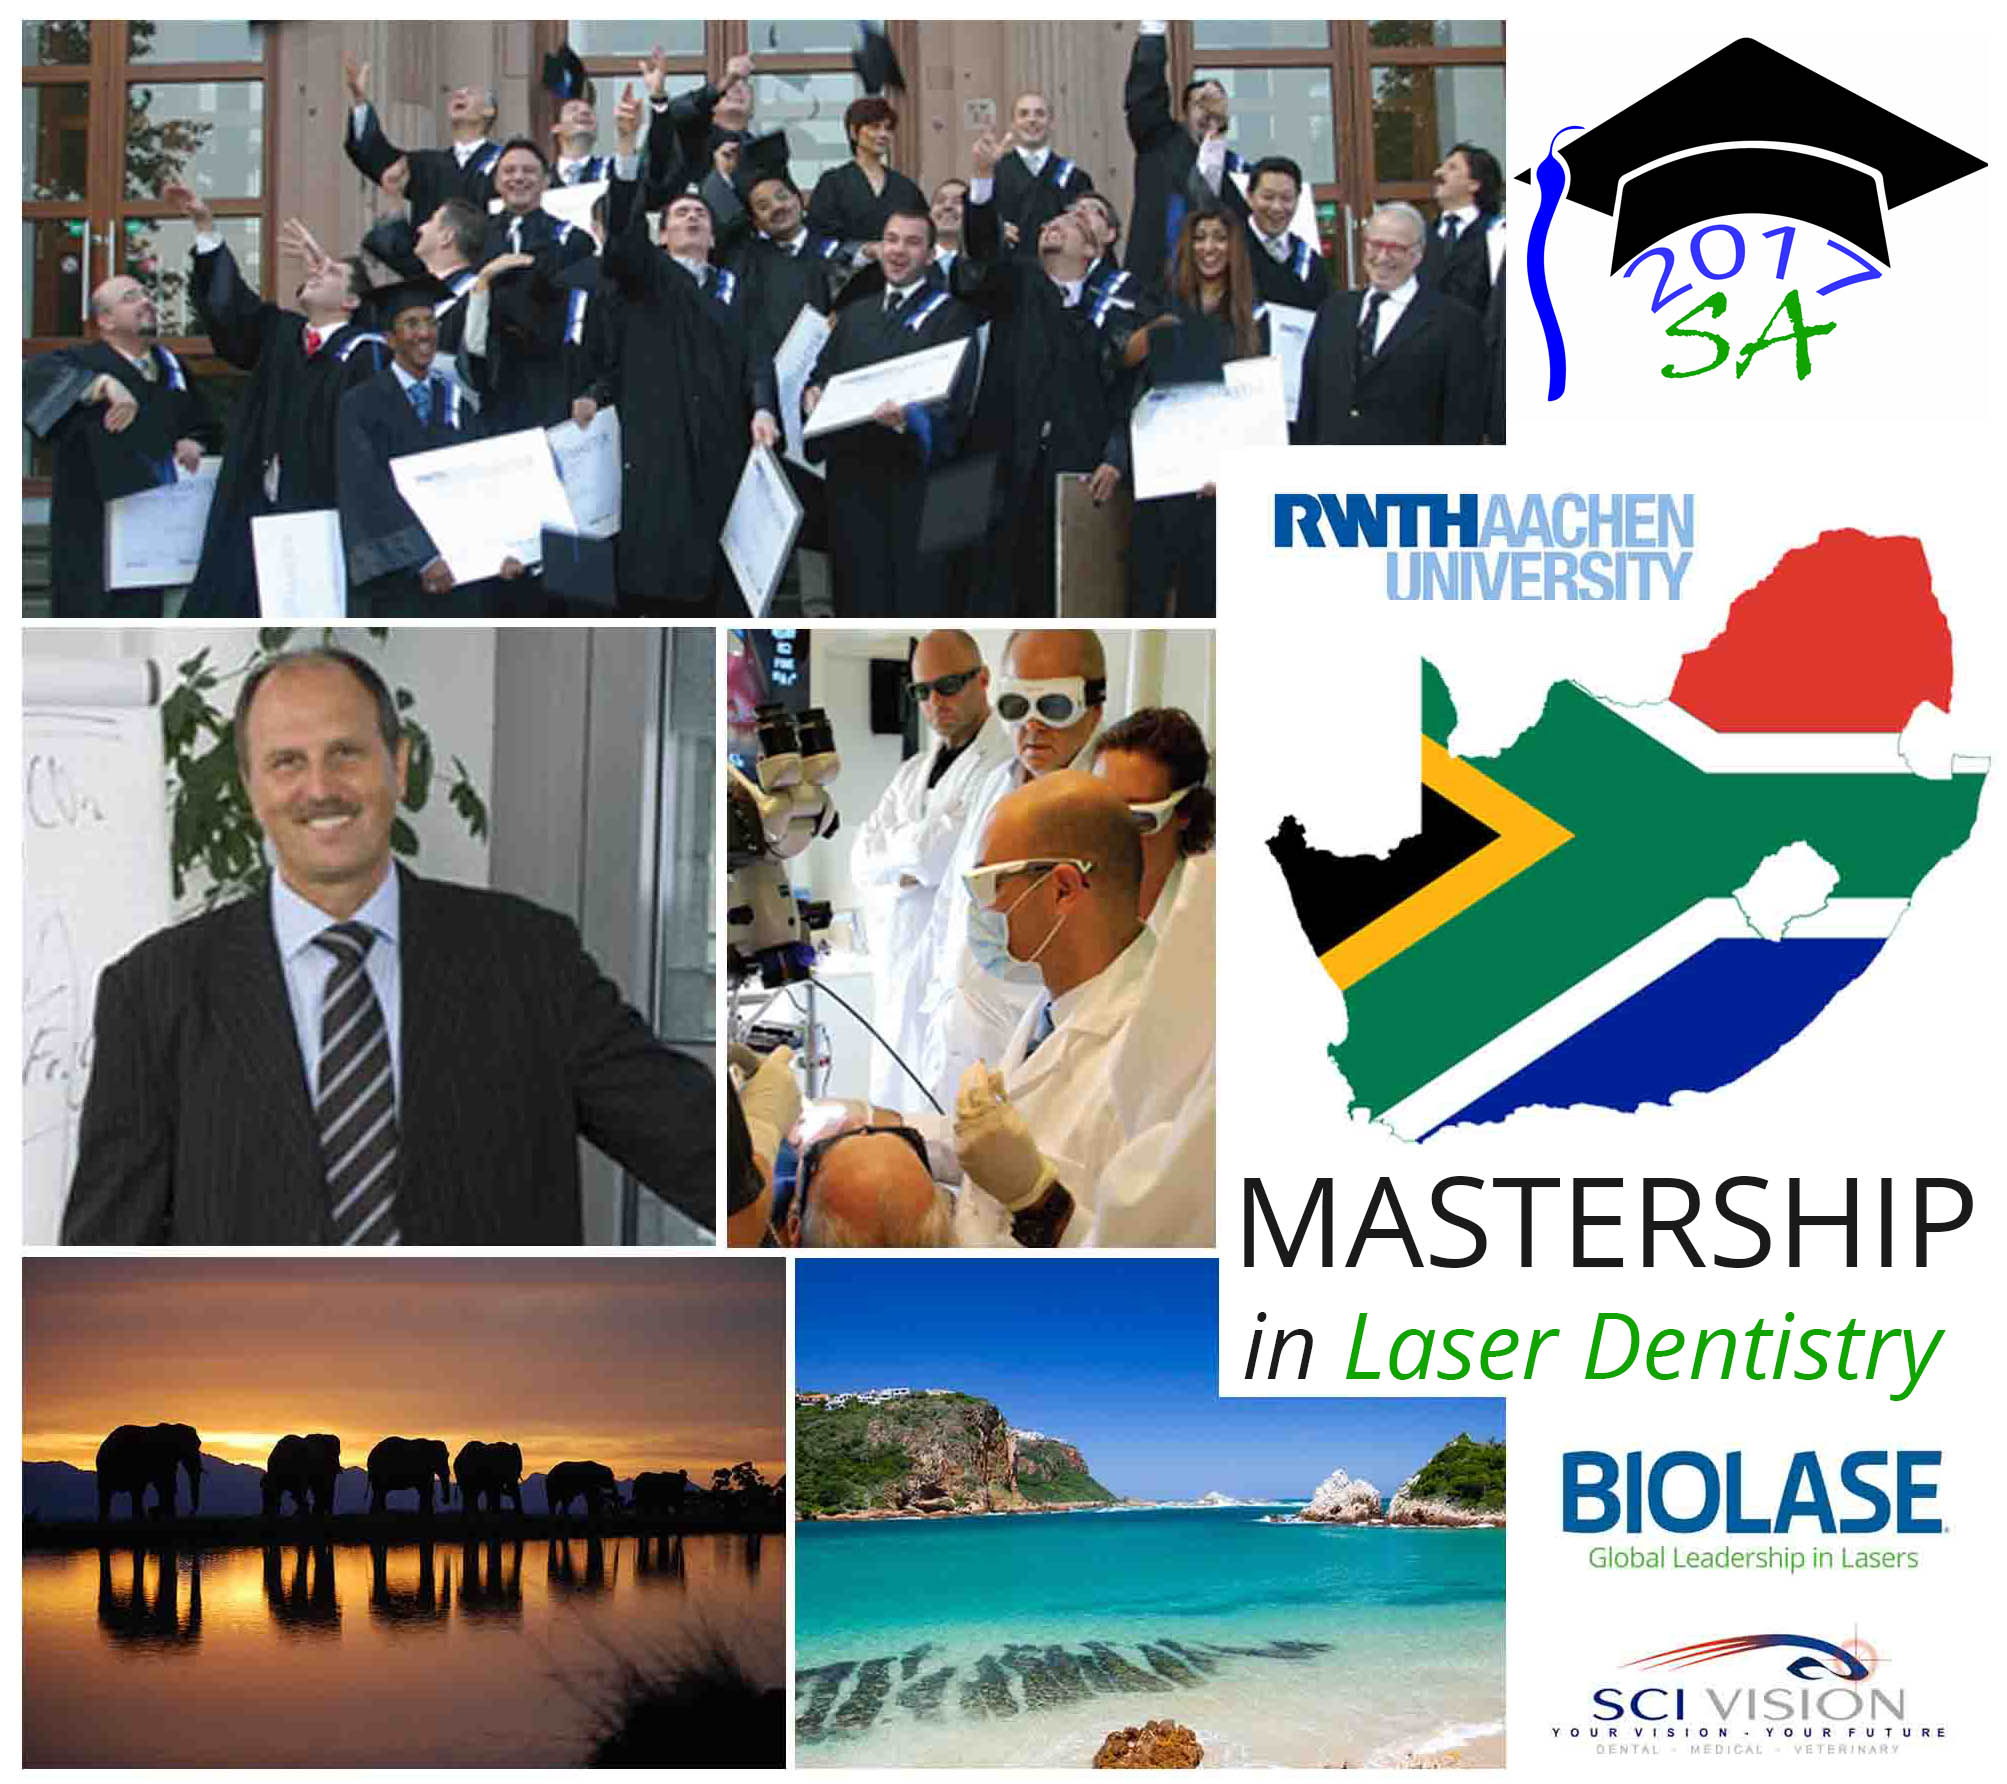 Mastership in Laser Dentistry comes to South Africa, Feb 2017